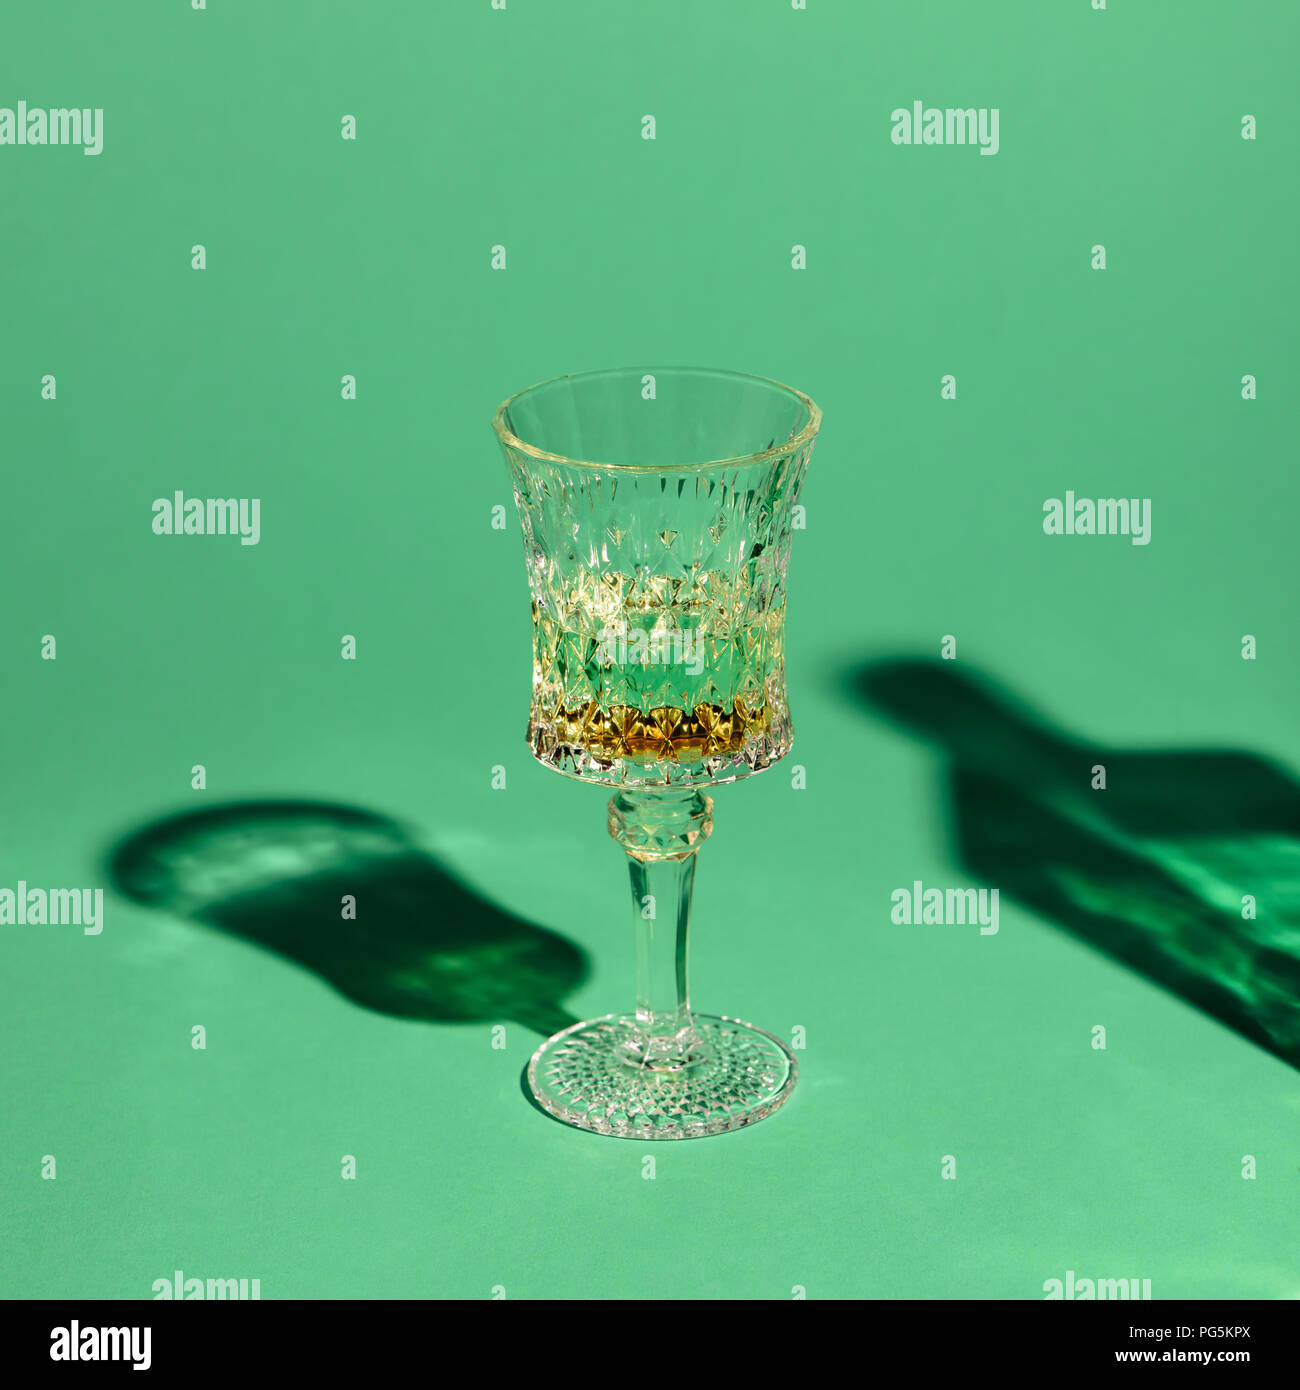 close-up shot of crystal glass of absinthe on green surface Stock Photo